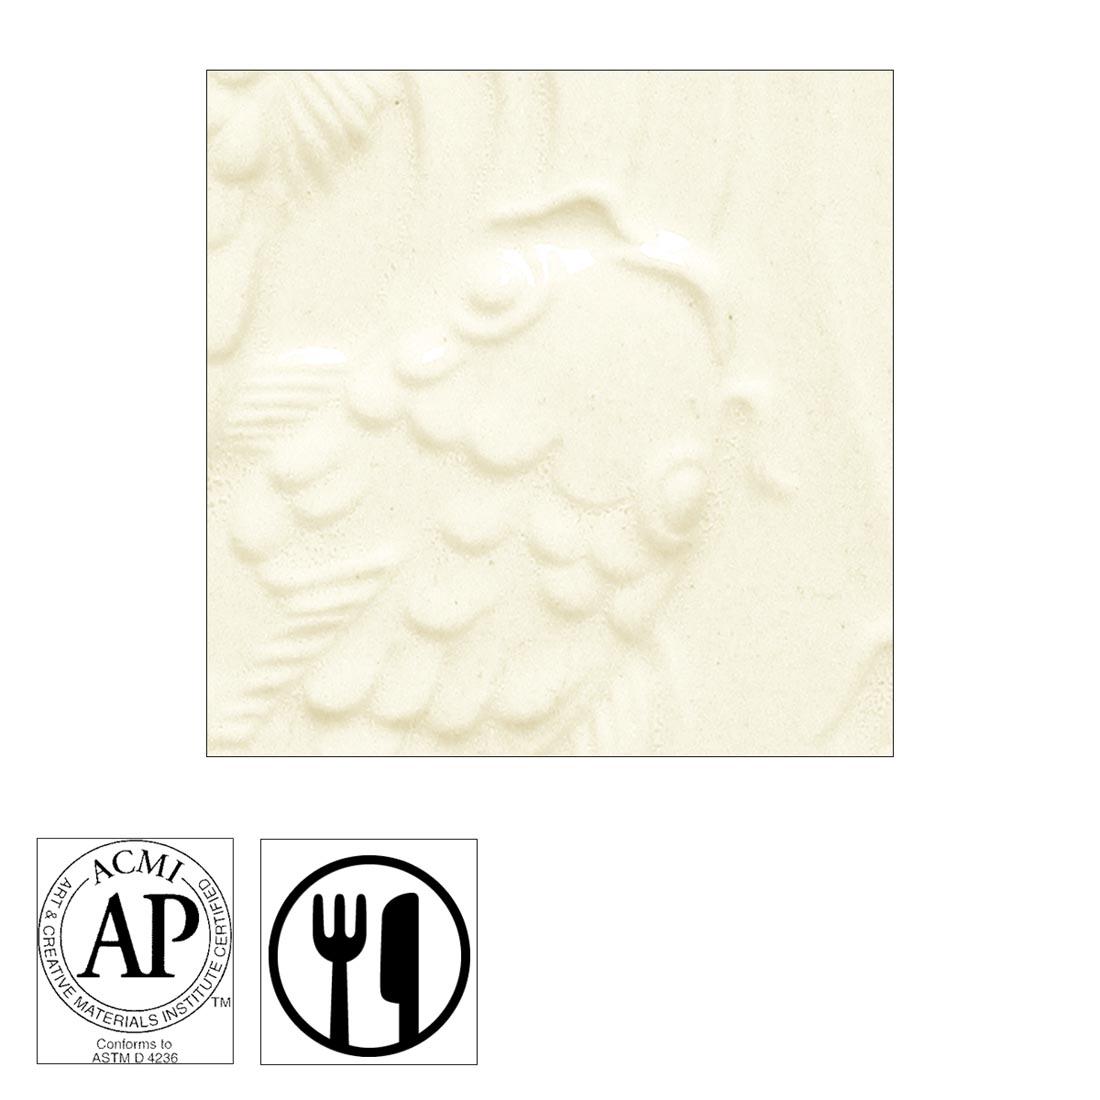 clay tile with Clear Transparent AMACO Gloss Glaze applied; symbols for AP Seal and food safe